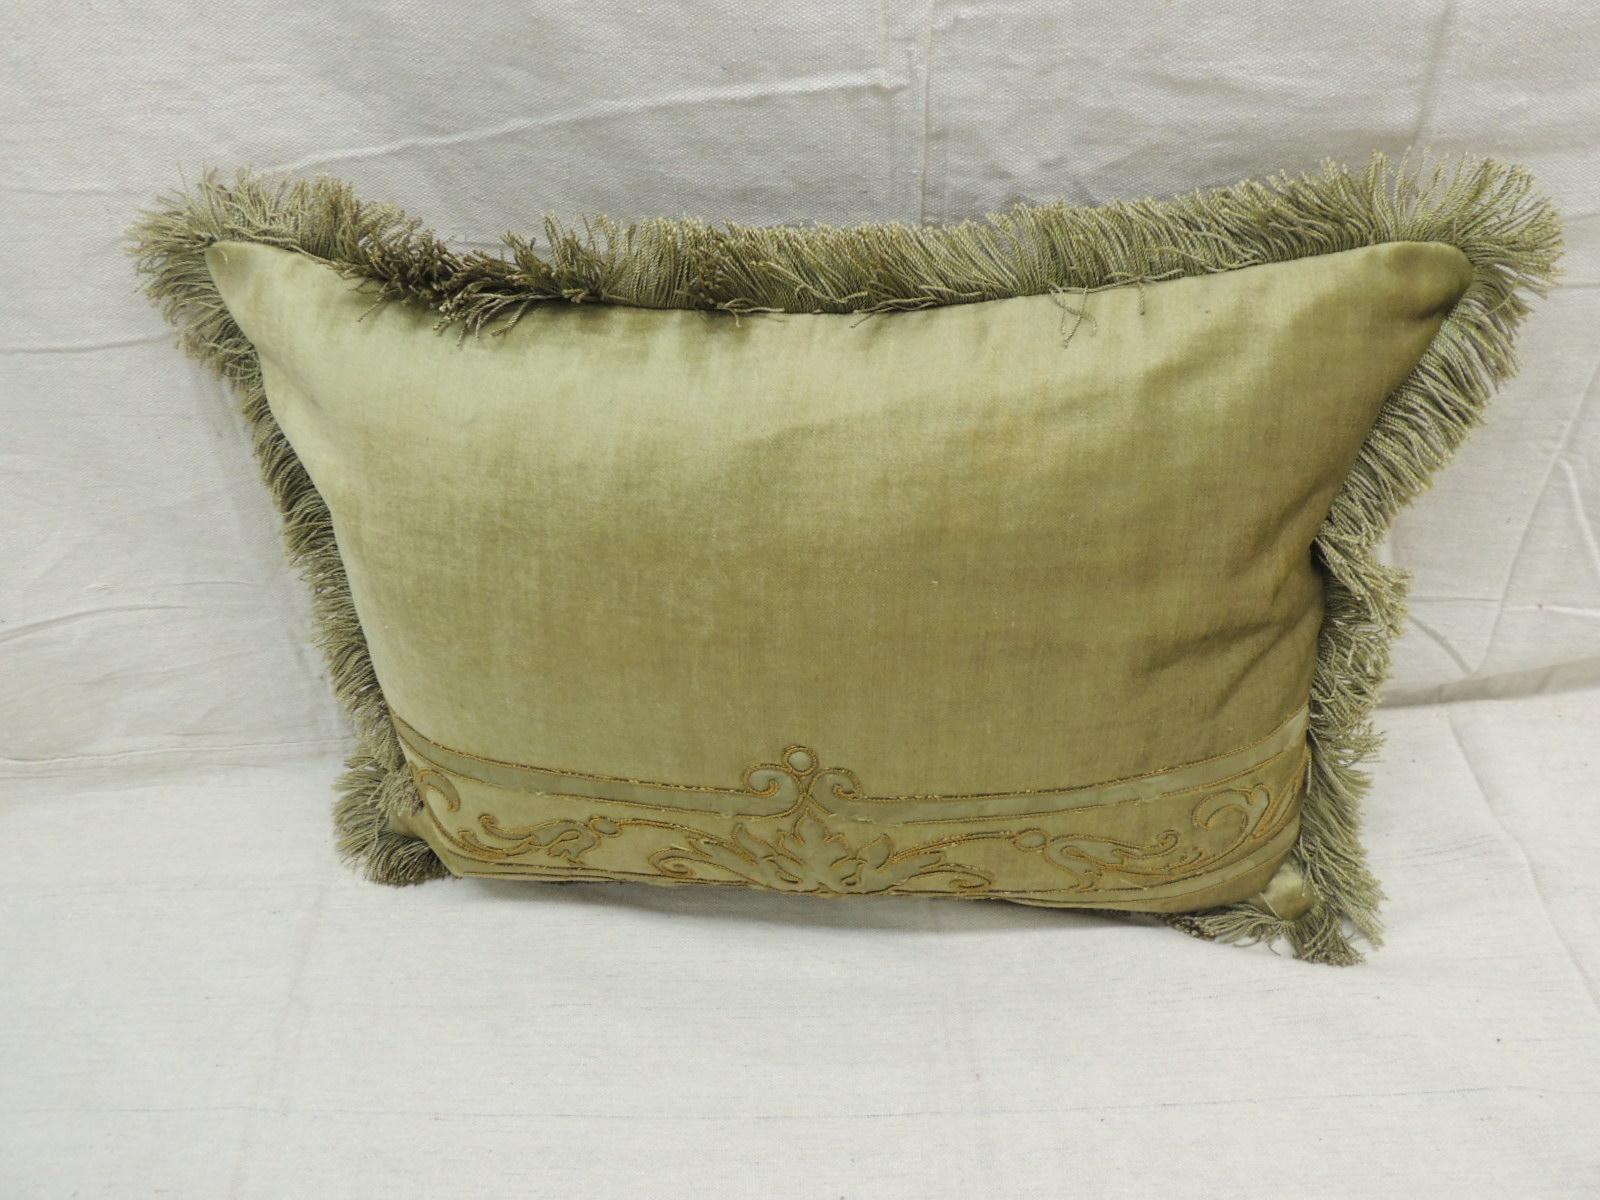 Antique silk velvet olive green applique decorative Bolster pillow.
Silk brocade embroidered green silk threads and applied onto silk velvet.
Original silk Brush trim from panel was used on pillows all around as trim.
(New) small check geen and